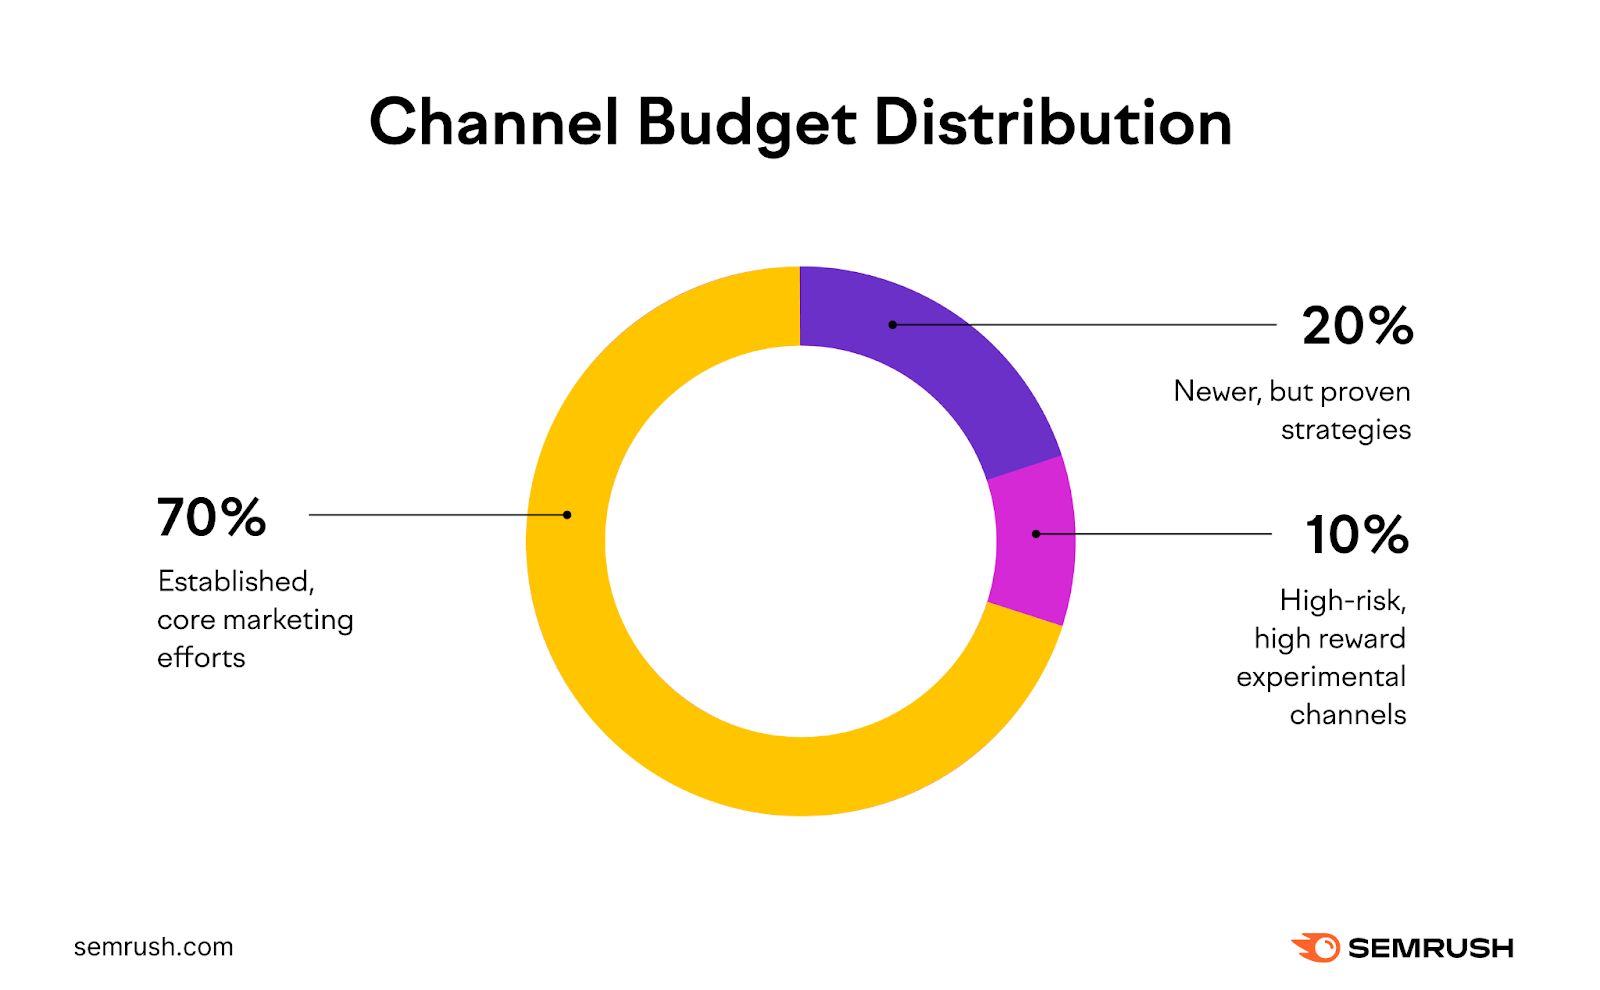 An infographic visually showing channel budget distribution